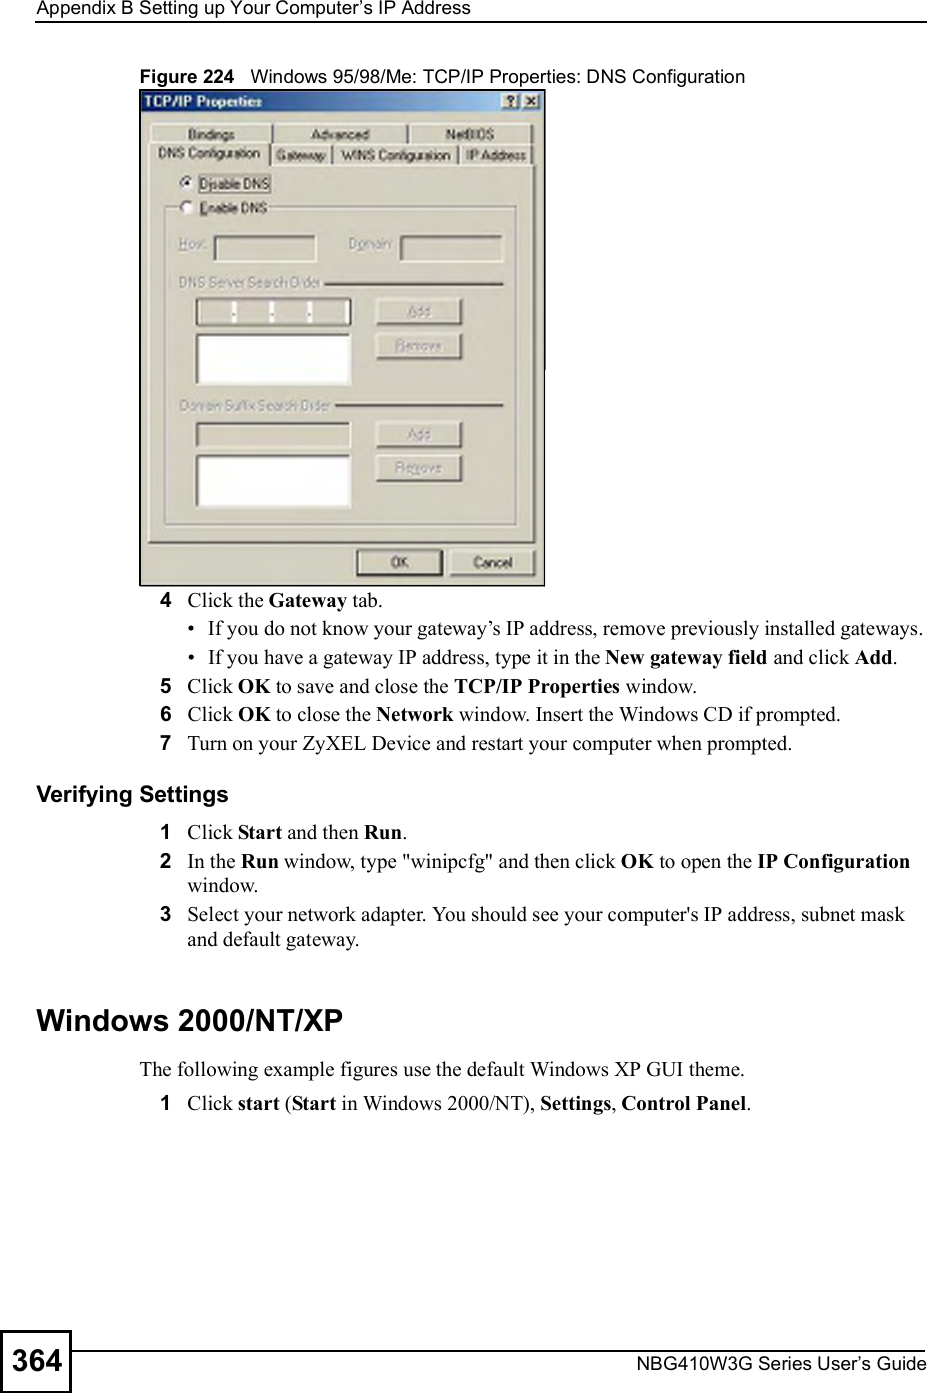 Appendix BSetting up Your Computer s IP AddressNBG410W3G Series User s Guide364Figure 224   Windows 95/98/Me: TCP/IP Properties: DNS Configuration4Click the Gateway tab. If you do not know your gateway!s IP address, remove previously installed gateways. If you have a gateway IP address, type it in the New gateway field and click Add.5Click OK to save and close the TCP/IP Properties window.6Click OK to close the Network window. Insert the Windows CD if prompted.7Turn on your ZyXEL Device and restart your computer when prompted.Verifying Settings1Click Start and then Run.2In the Run window, type &quot;winipcfg&quot; and then click OK to open the IP Configuration window.3Select your network adapter. You should see your computer&apos;s IP address, subnet mask and default gateway.Windows 2000/NT/XPThe following example figures use the default Windows XP GUI theme.1Click start (Start in Windows 2000/NT), Settings, Control Panel.